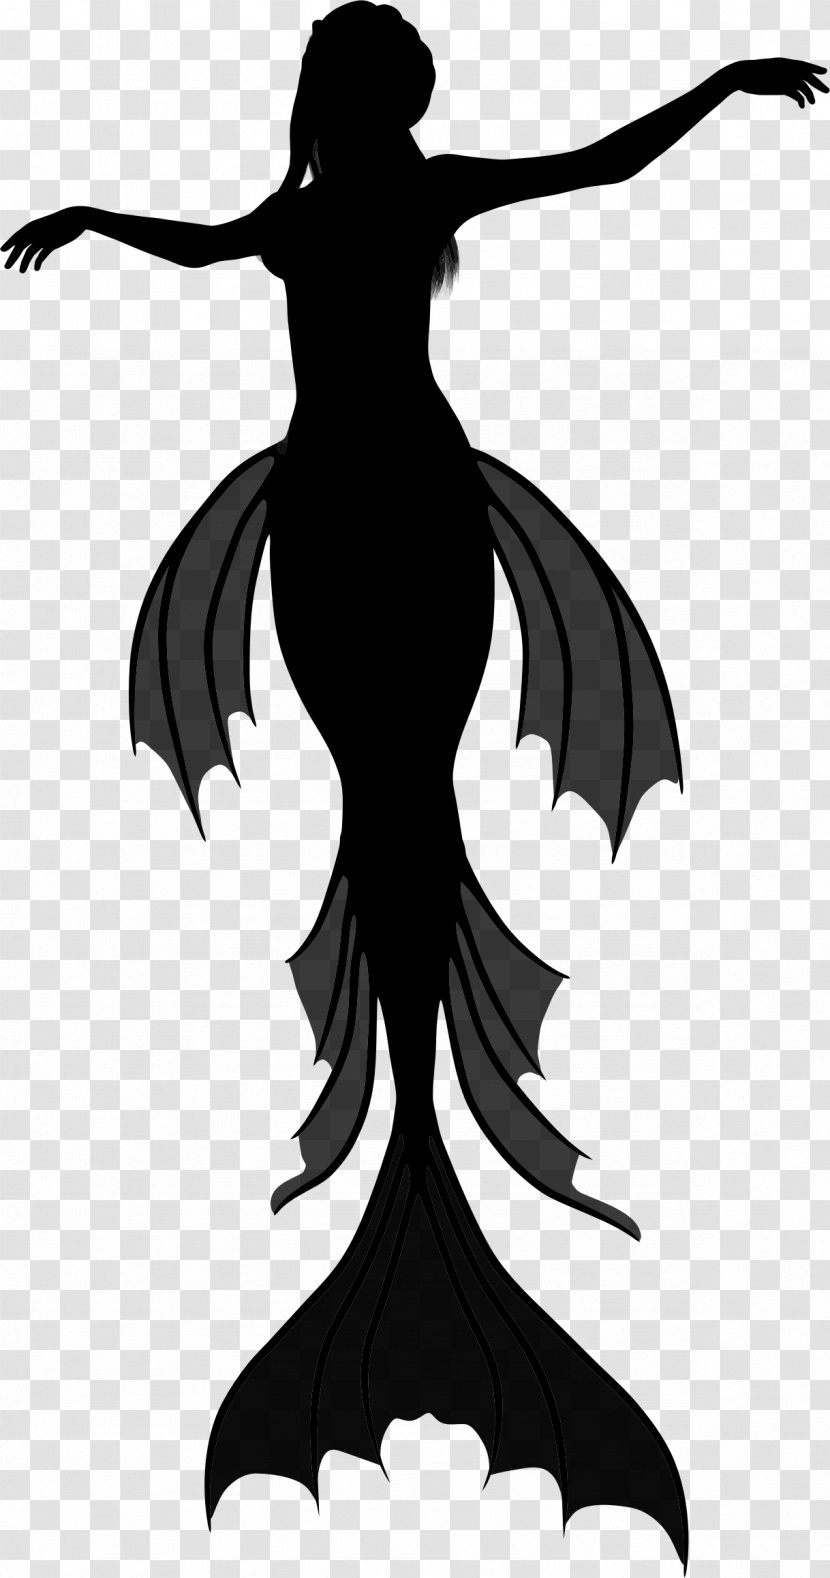 Silhouette Mermaid Fairy Tale - Tail Transparent PNG